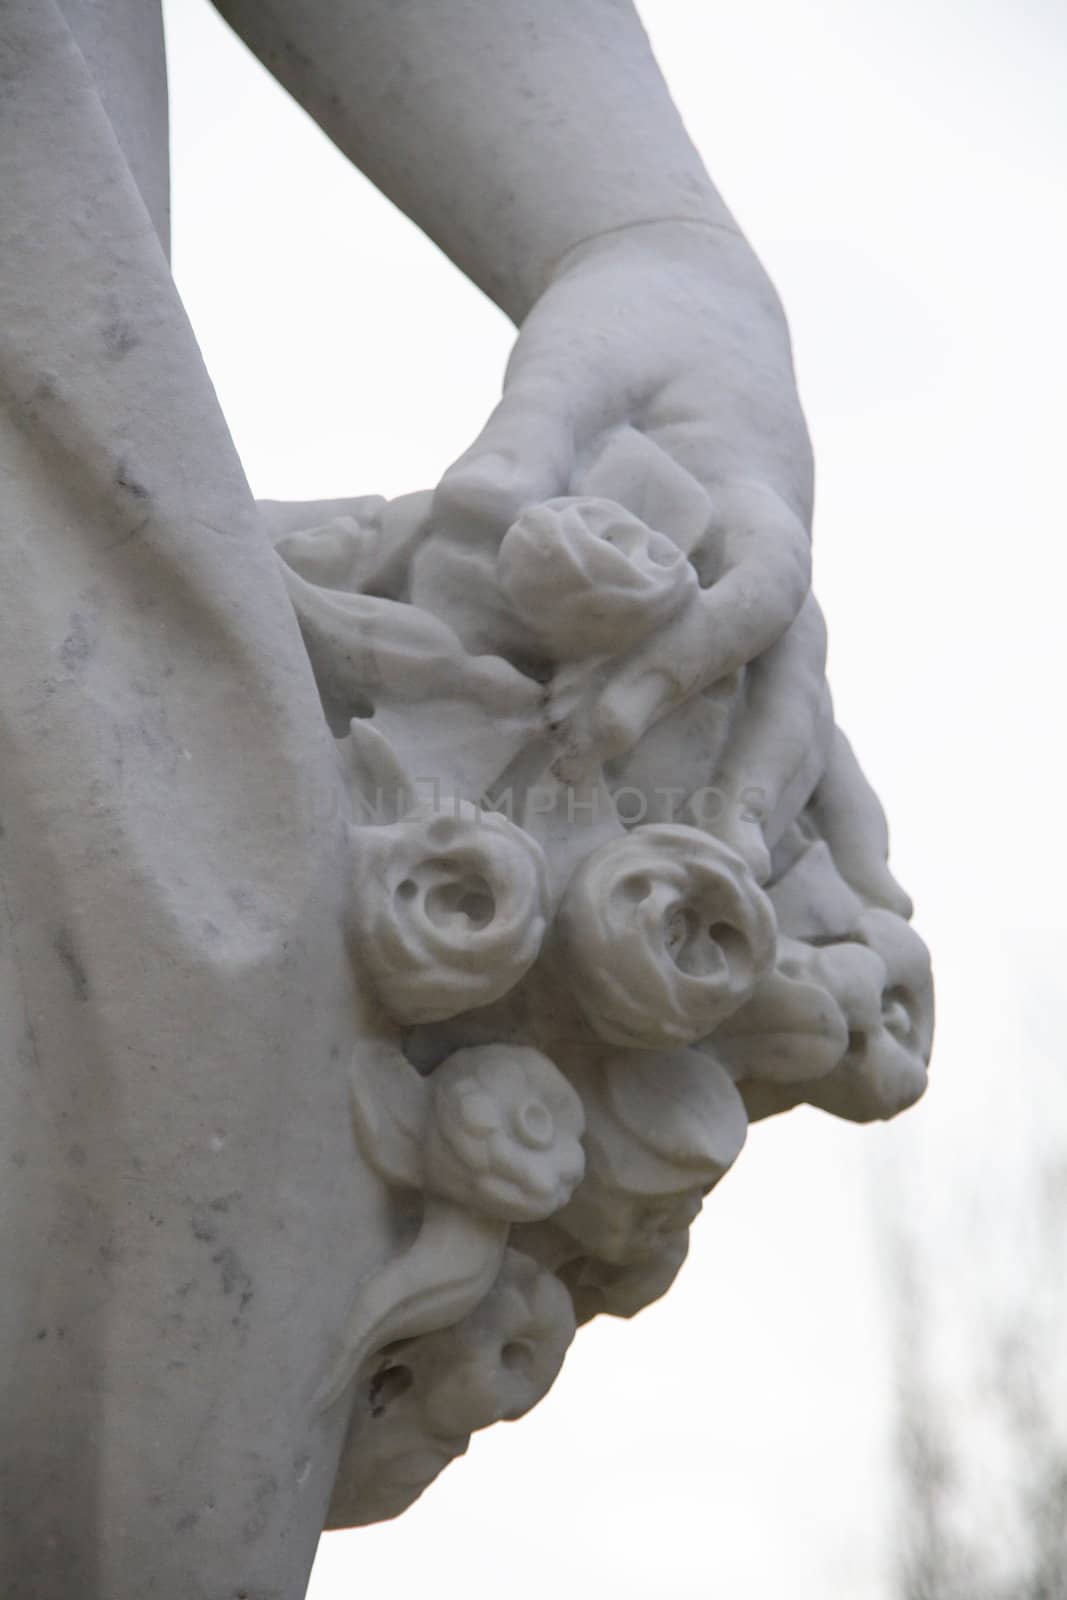 Part of an antique statue holding roses